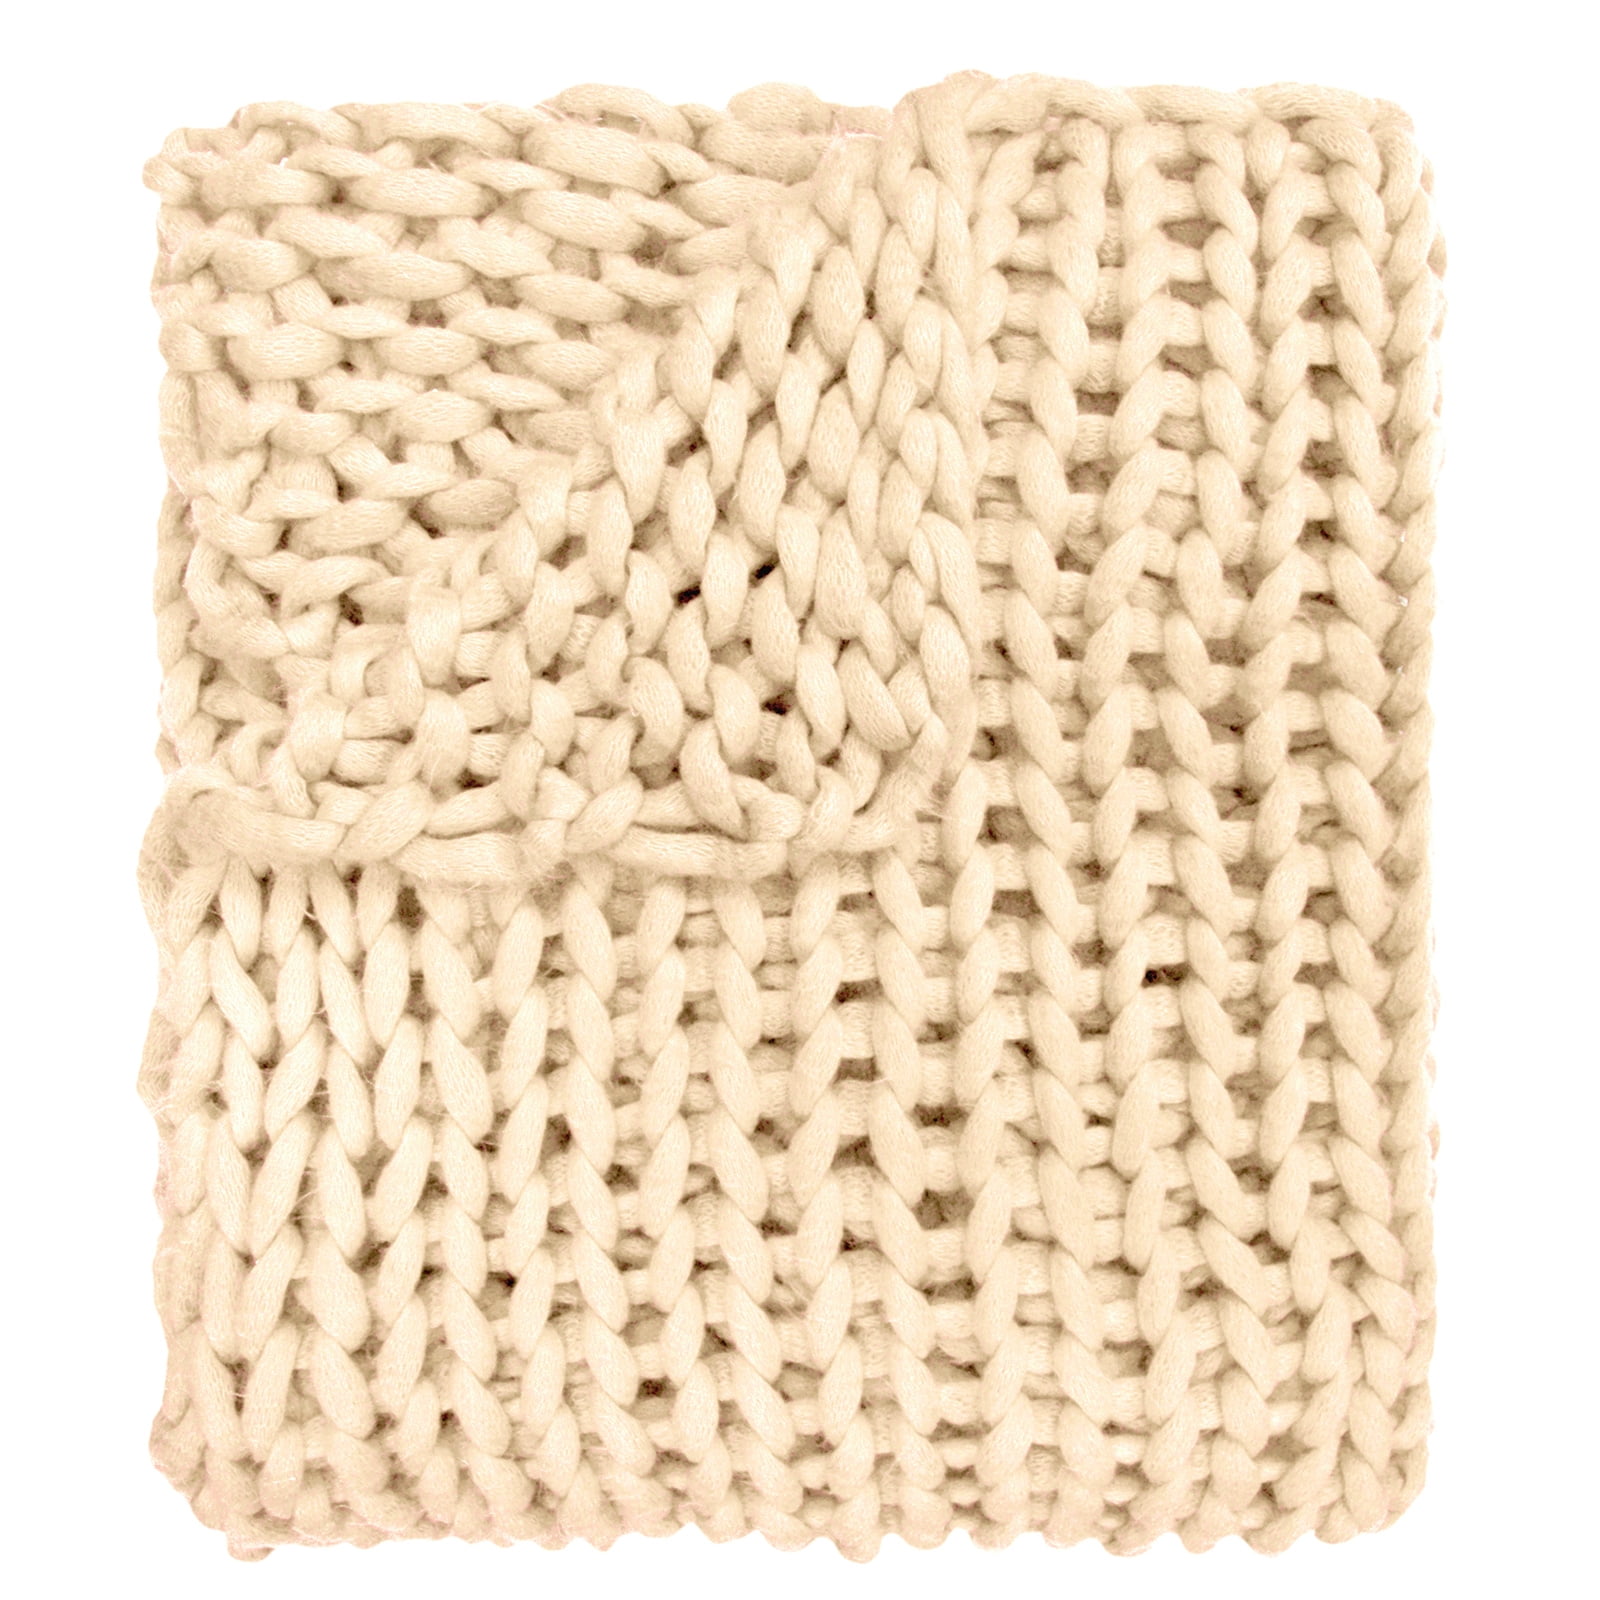 Picture of American Heritage Textiles 70001 40 x 50 in. Chunky Knit Throw, Cream